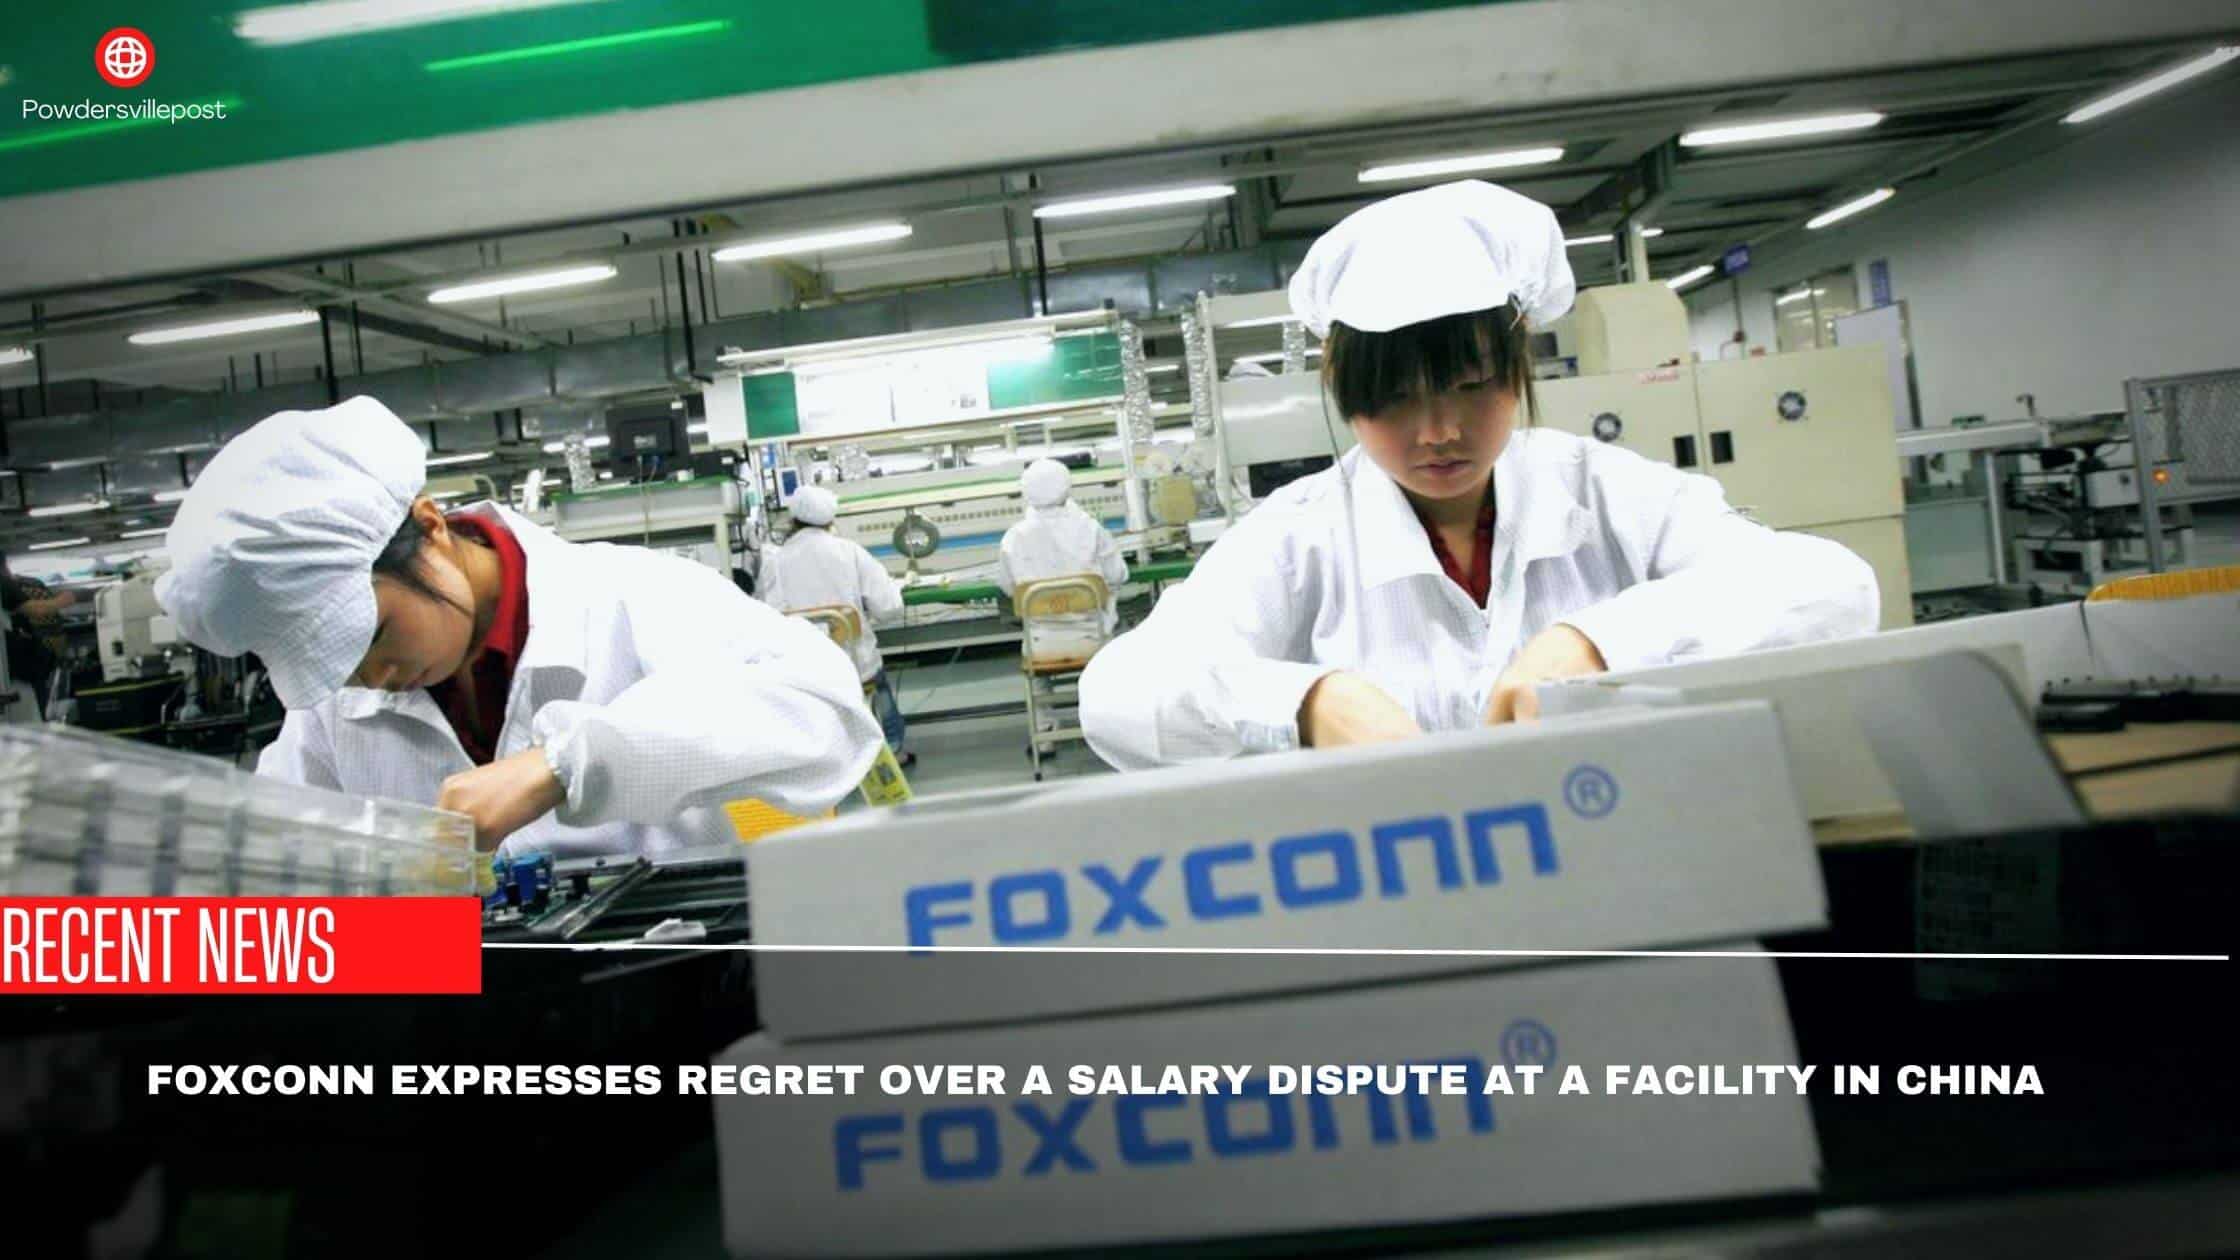 Foxconn Expresses Regret Over A Salary Dispute At A Facility In China